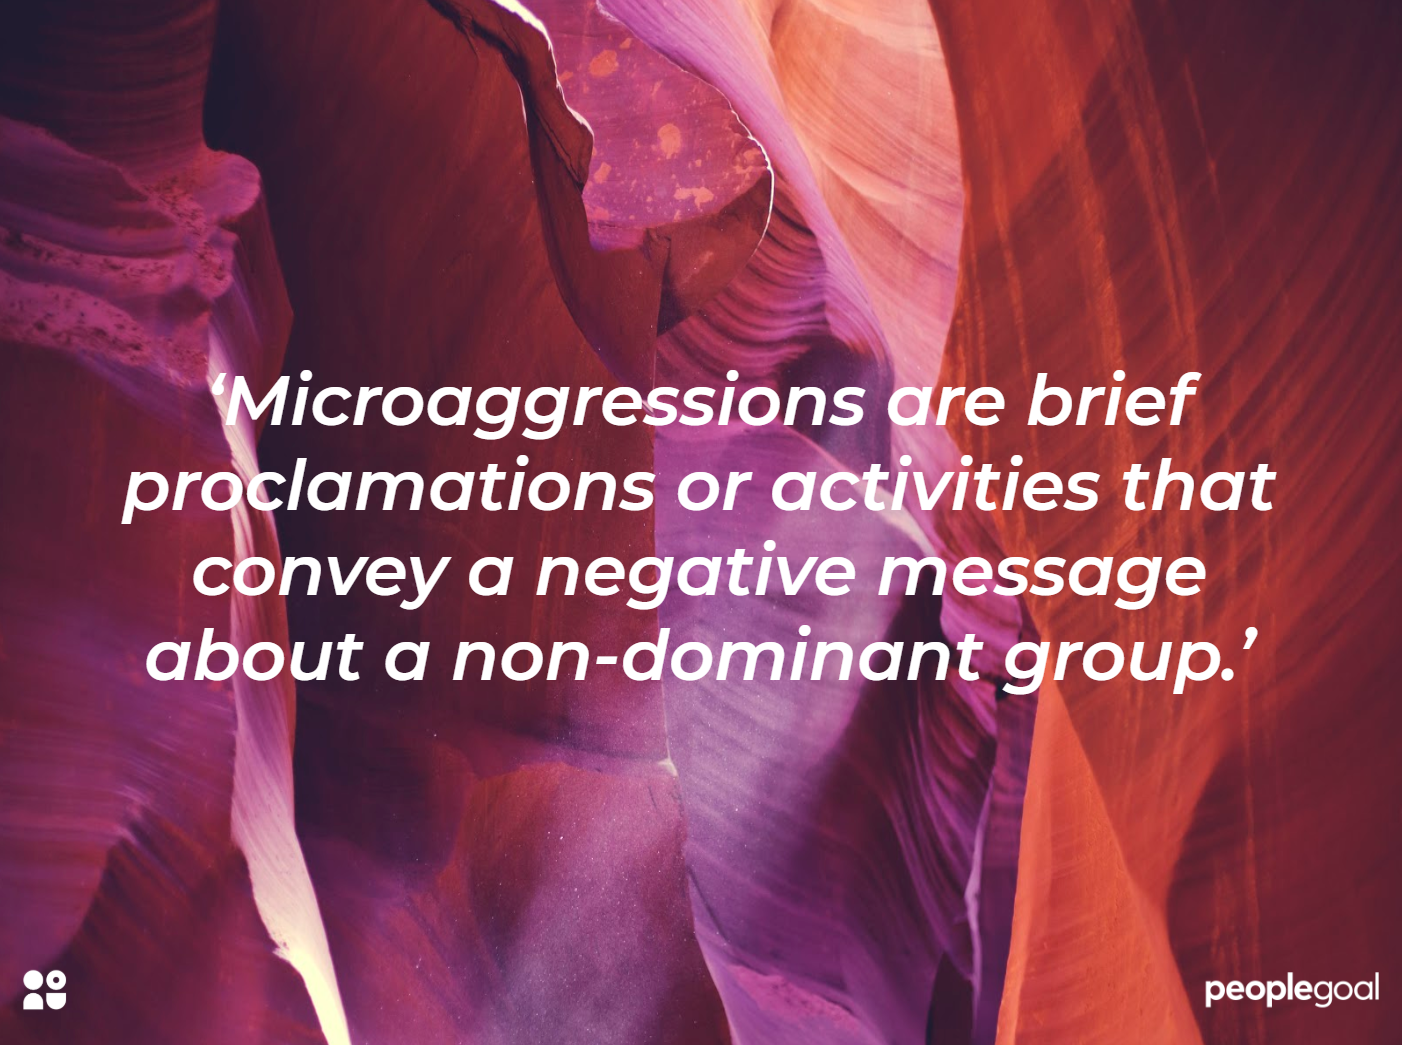 Microaggressions in the workplace - Definition